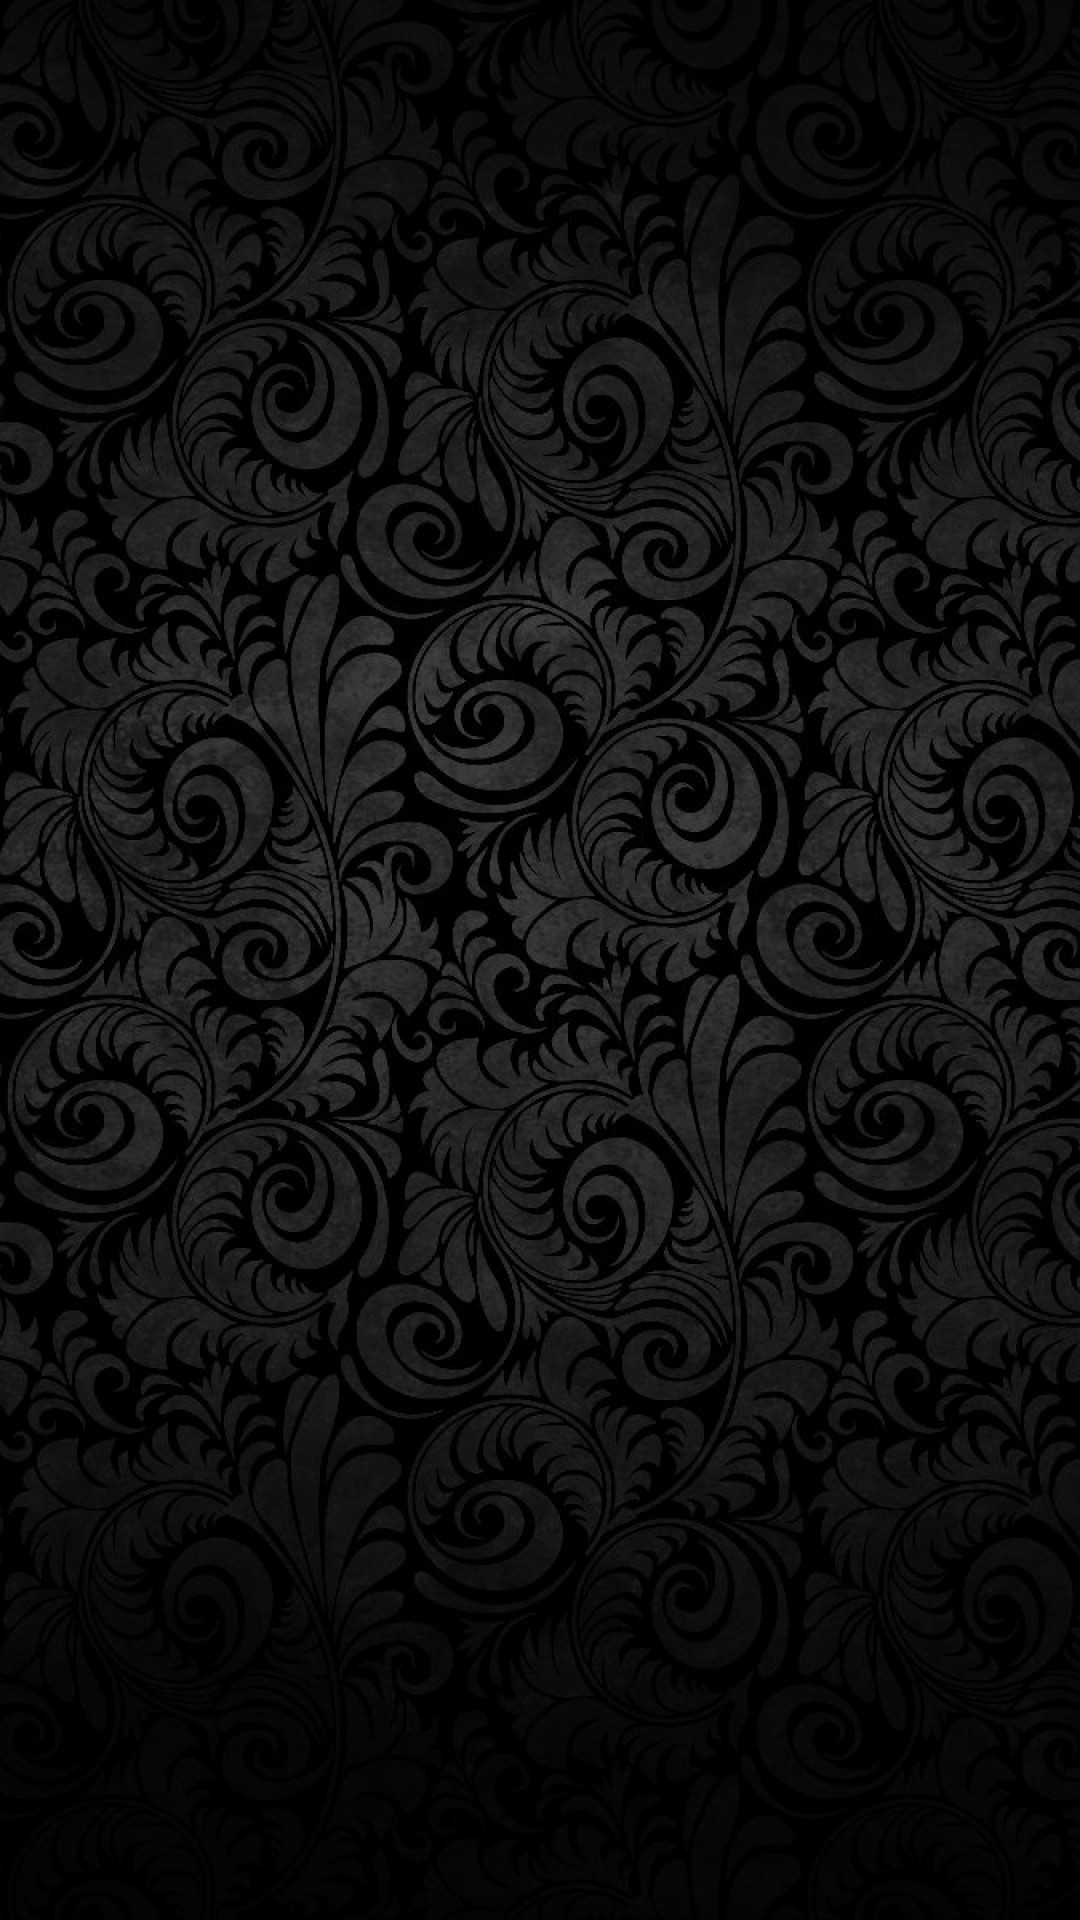 1080x1920 Search Results for “iphone plus wallpaper black” – Adorable Wallpapers